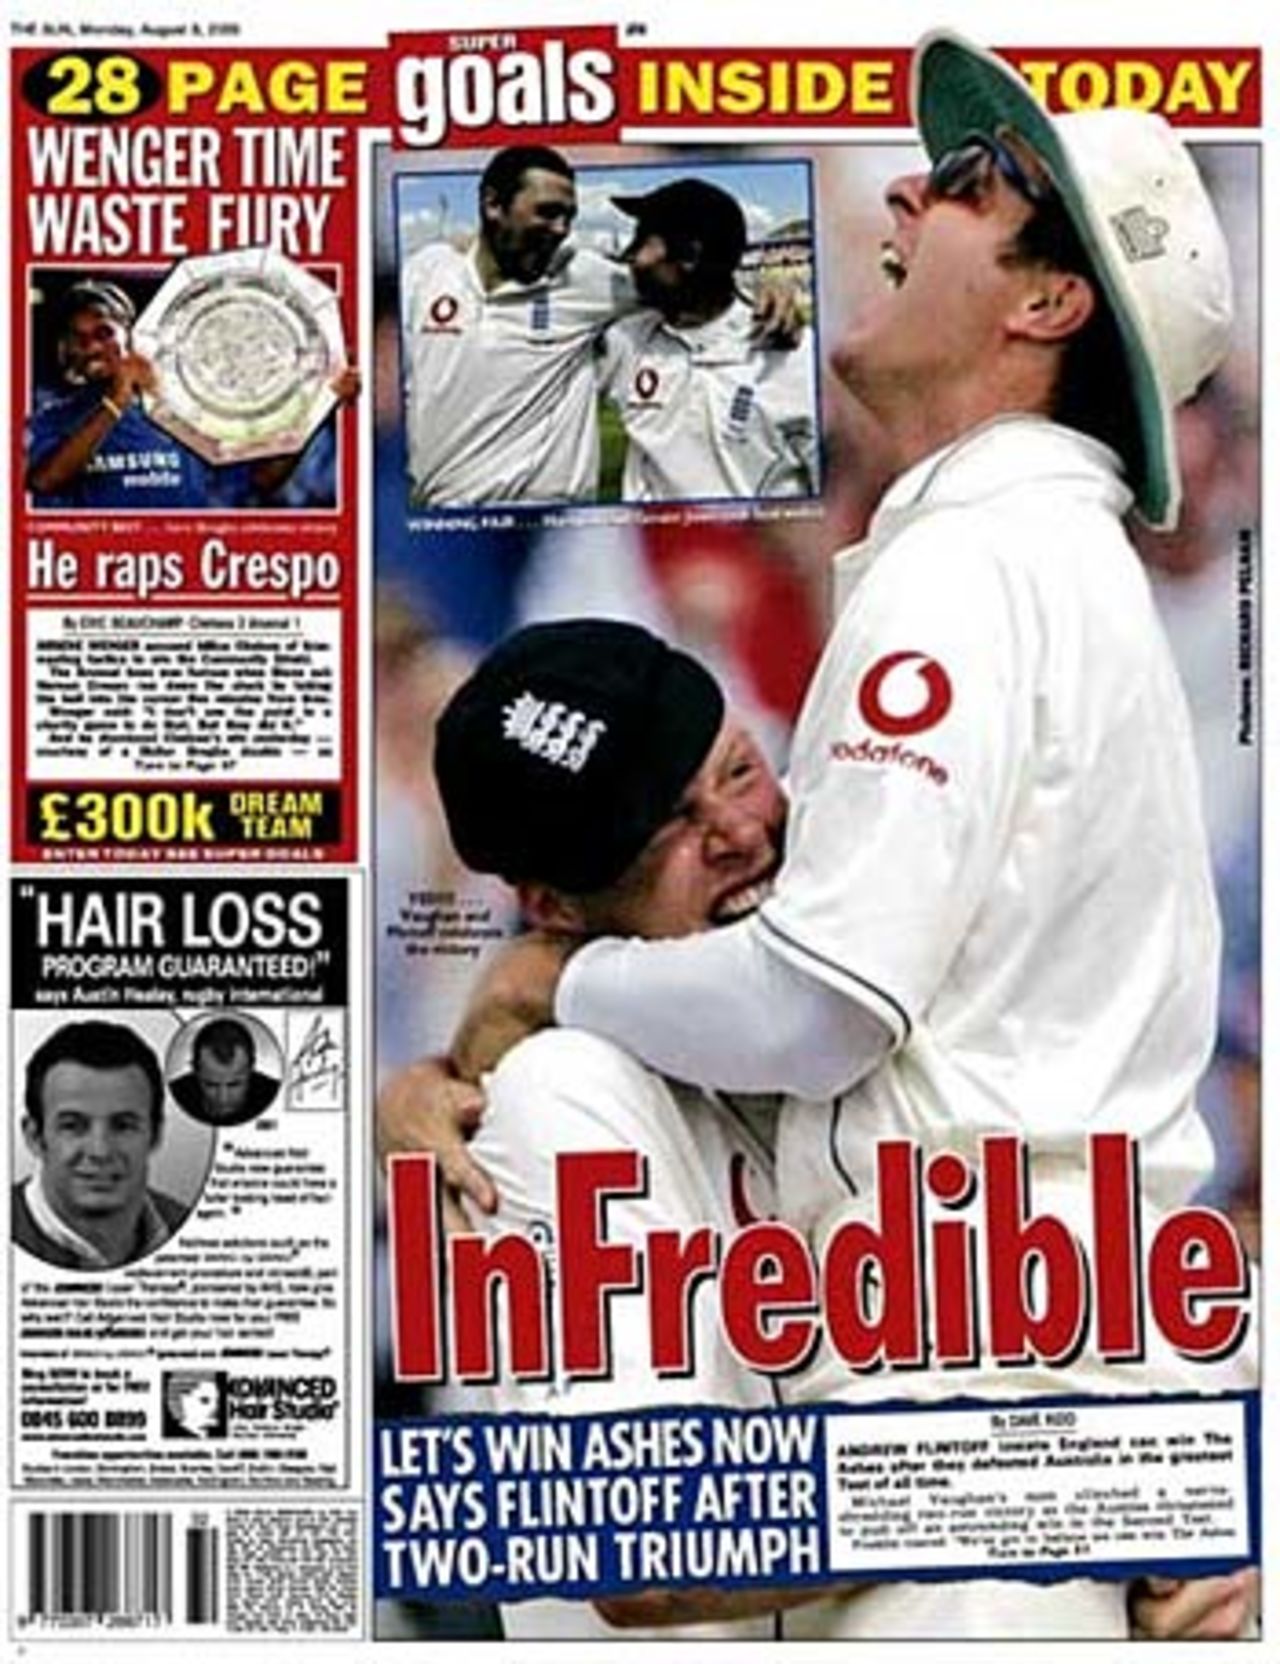 The back page of <I>The Sun</I>, August 8, 2005